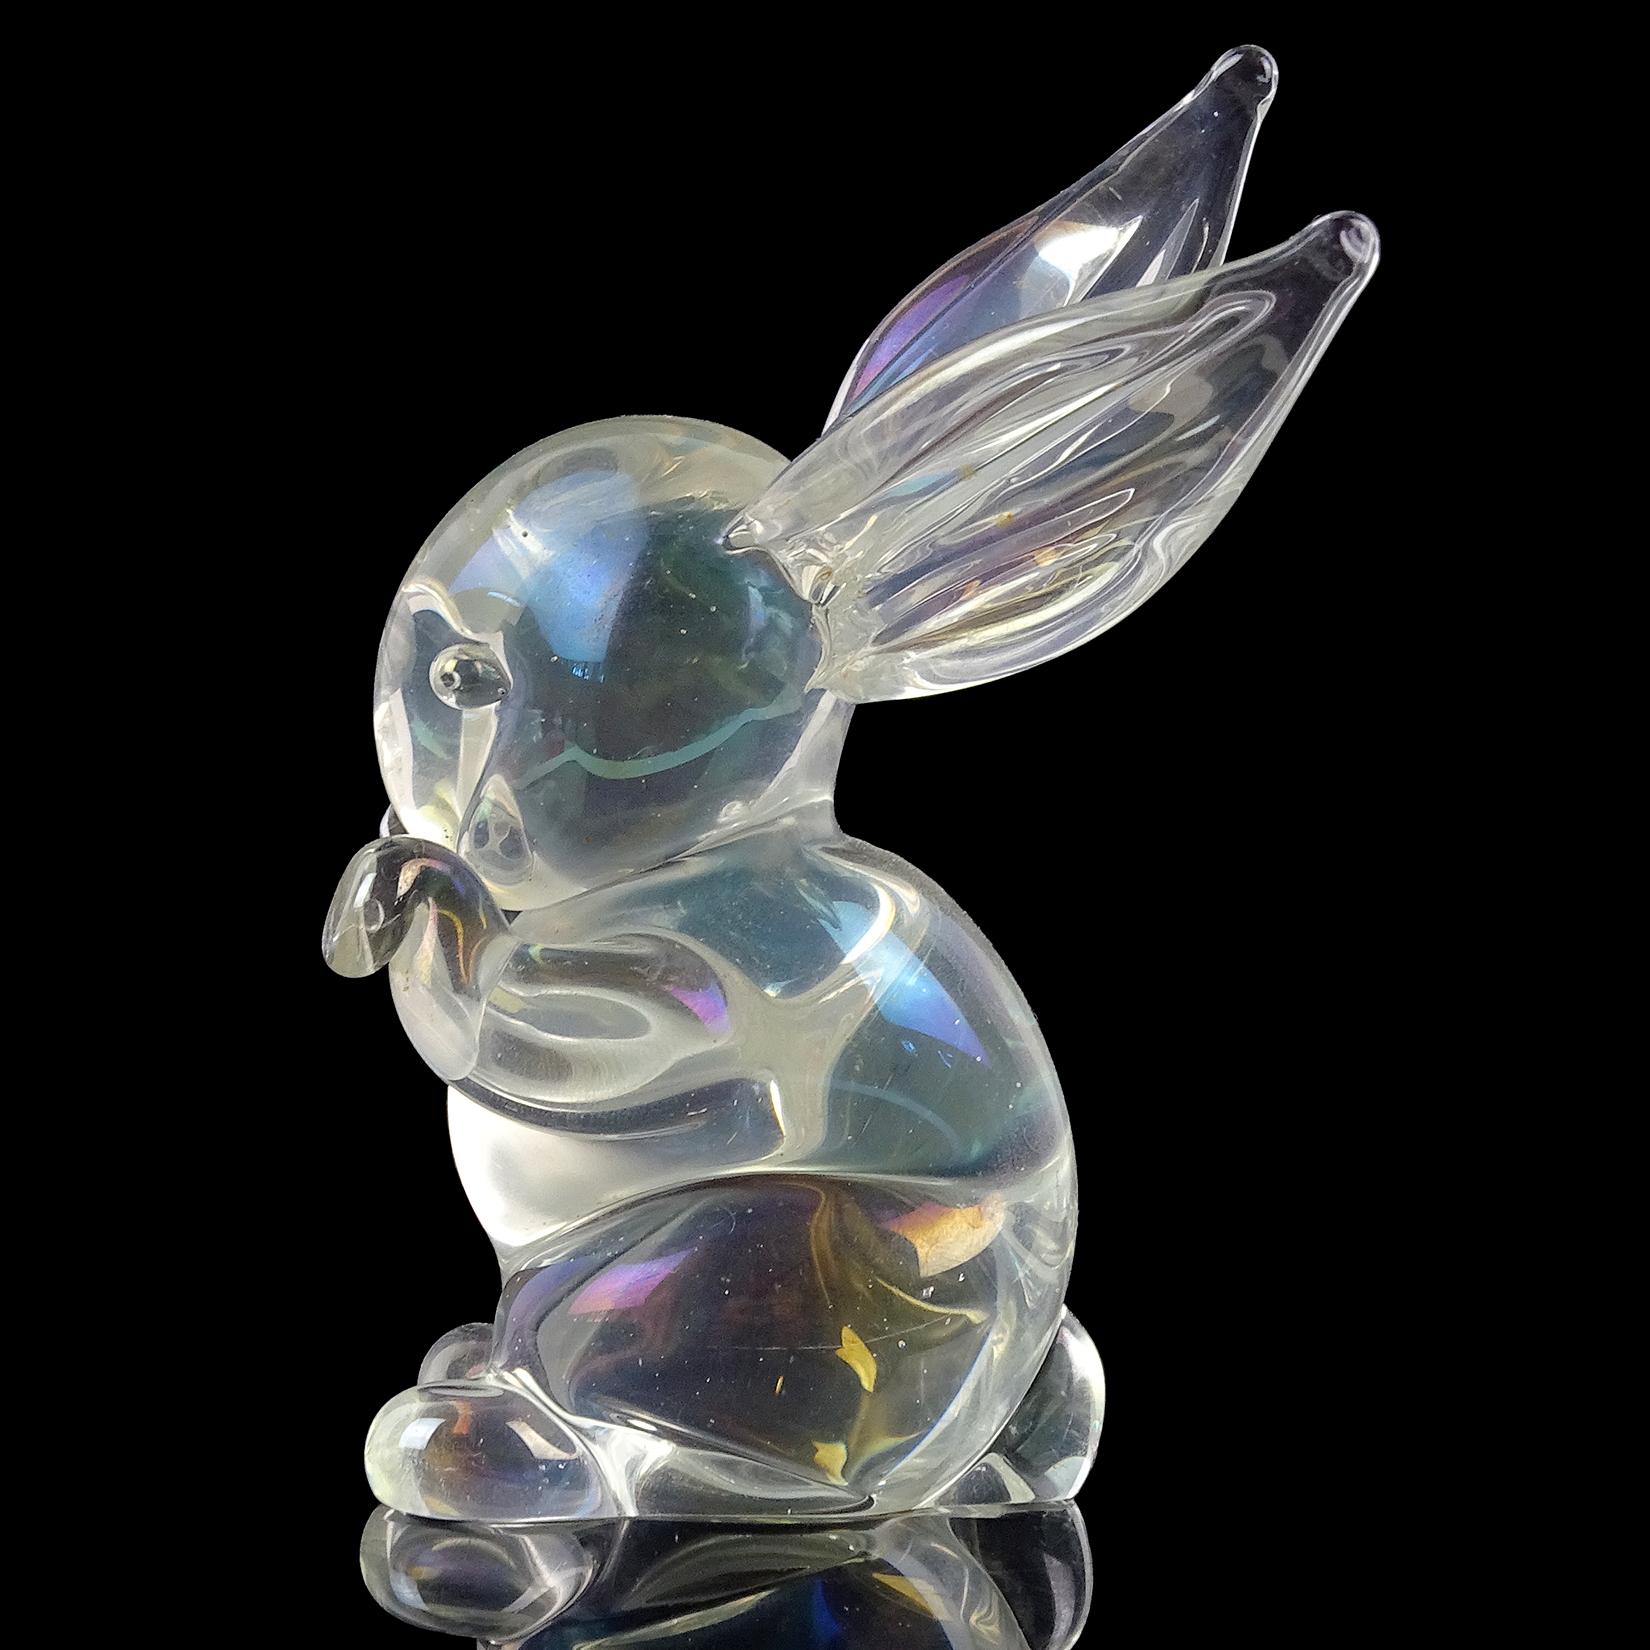 Beautiful and very cute vintage Murano hand blown clear iridescent Italian art glass bunny rabbit sculpture / figurine. Documented to designer Archimede Seguso, with original 